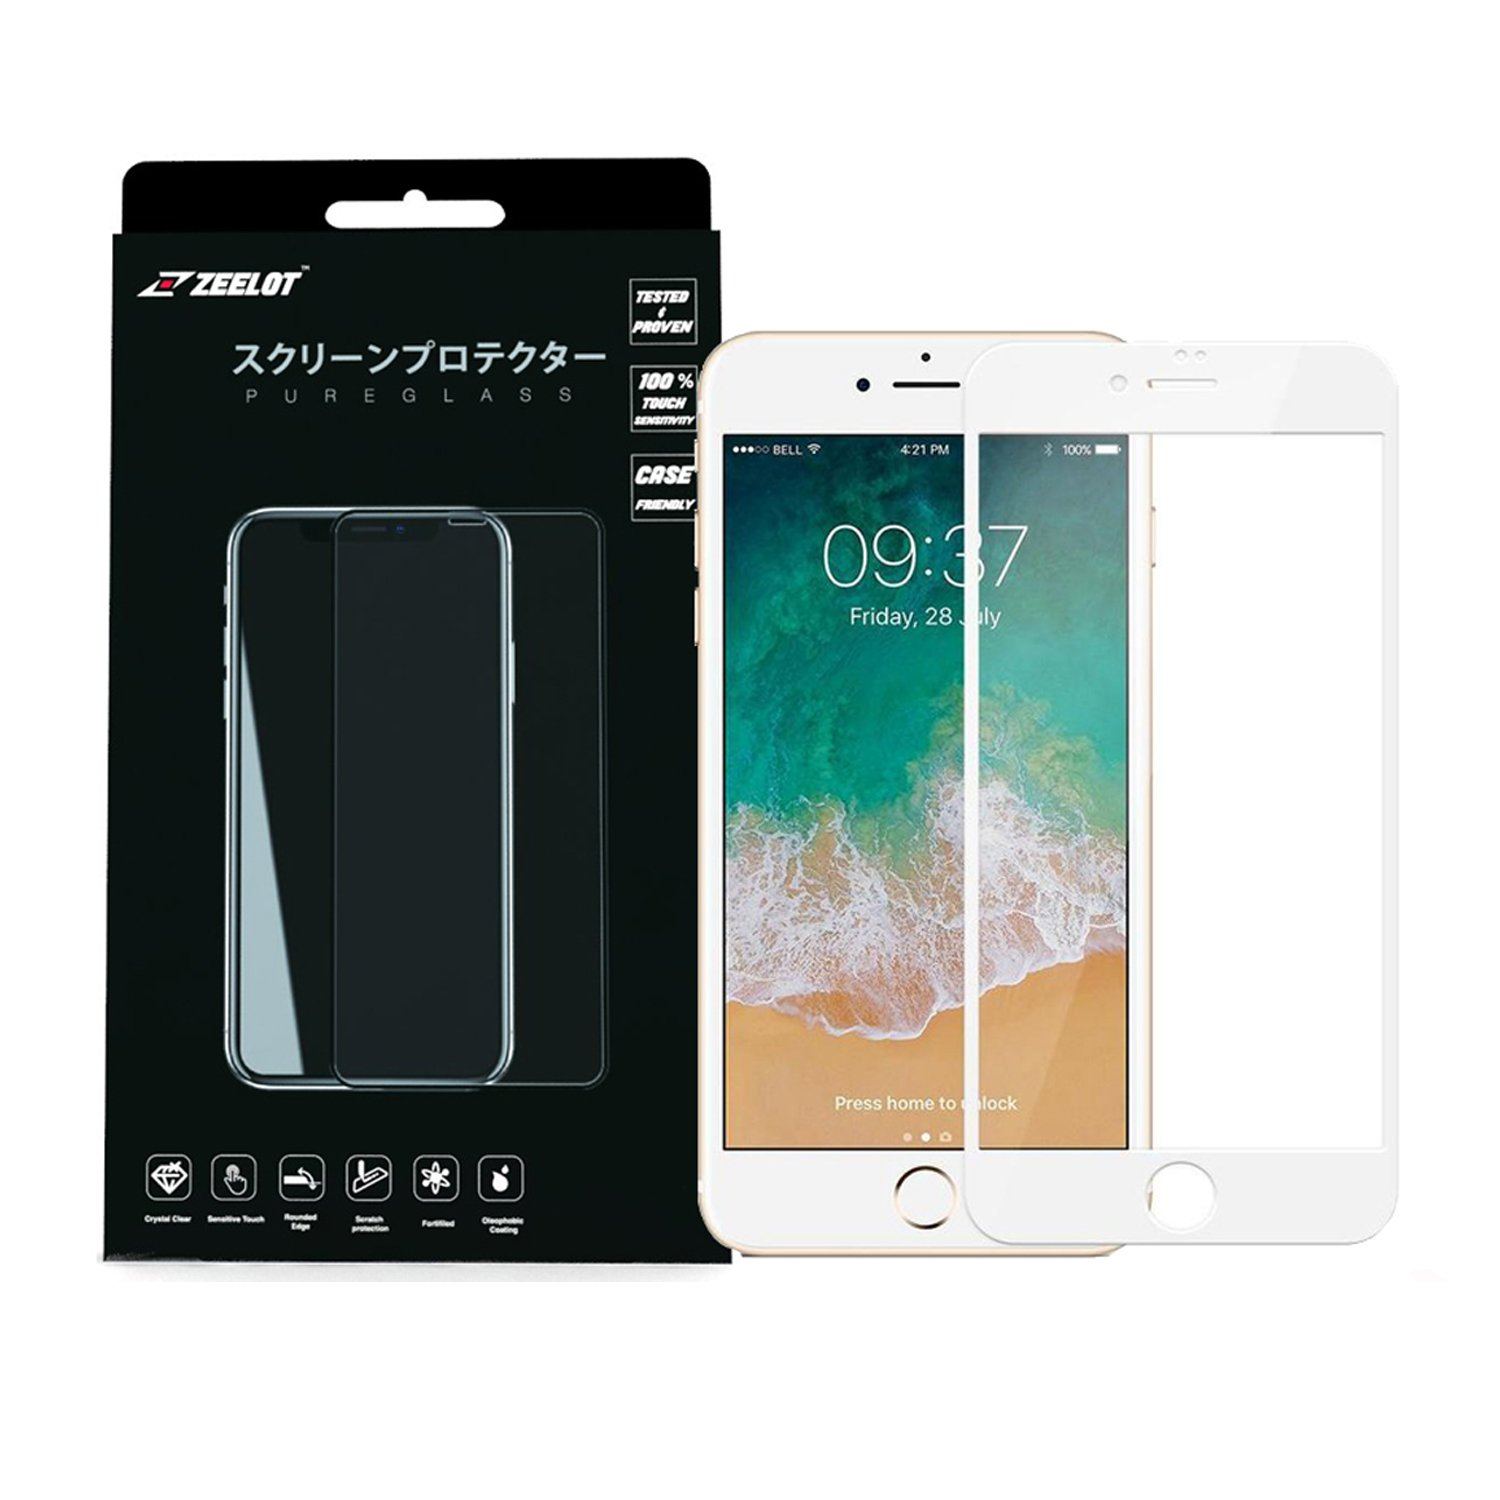 ZEELOT PureGlass 2.5D Tempered Glass Screen Protector for iPhone 8/7 Plus 5.5" (2017/2016), White Tempered Glass ZEELOT 